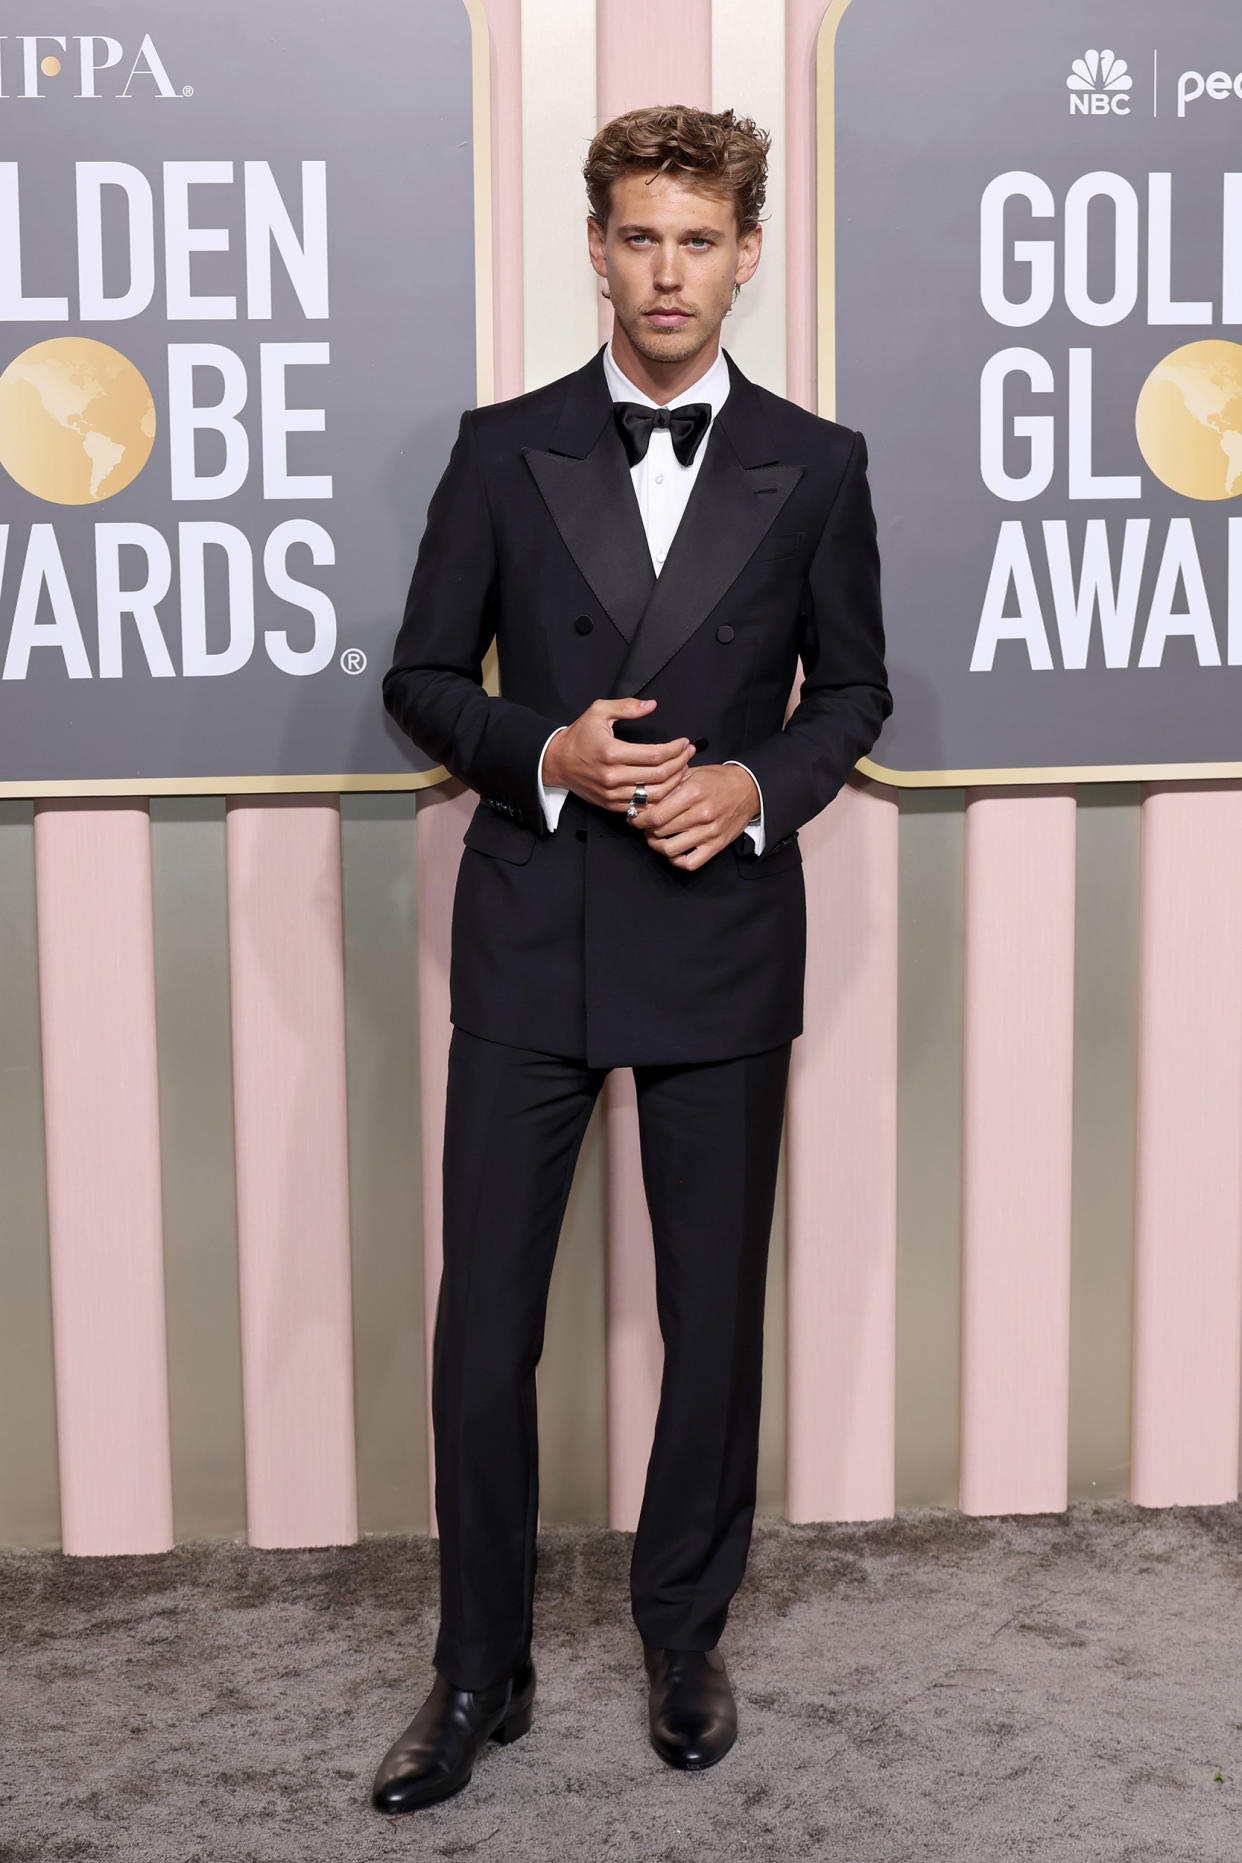 Image: 80th Annual Golden Globe Awards - Arrivals (Amy Sussman / Getty Images)